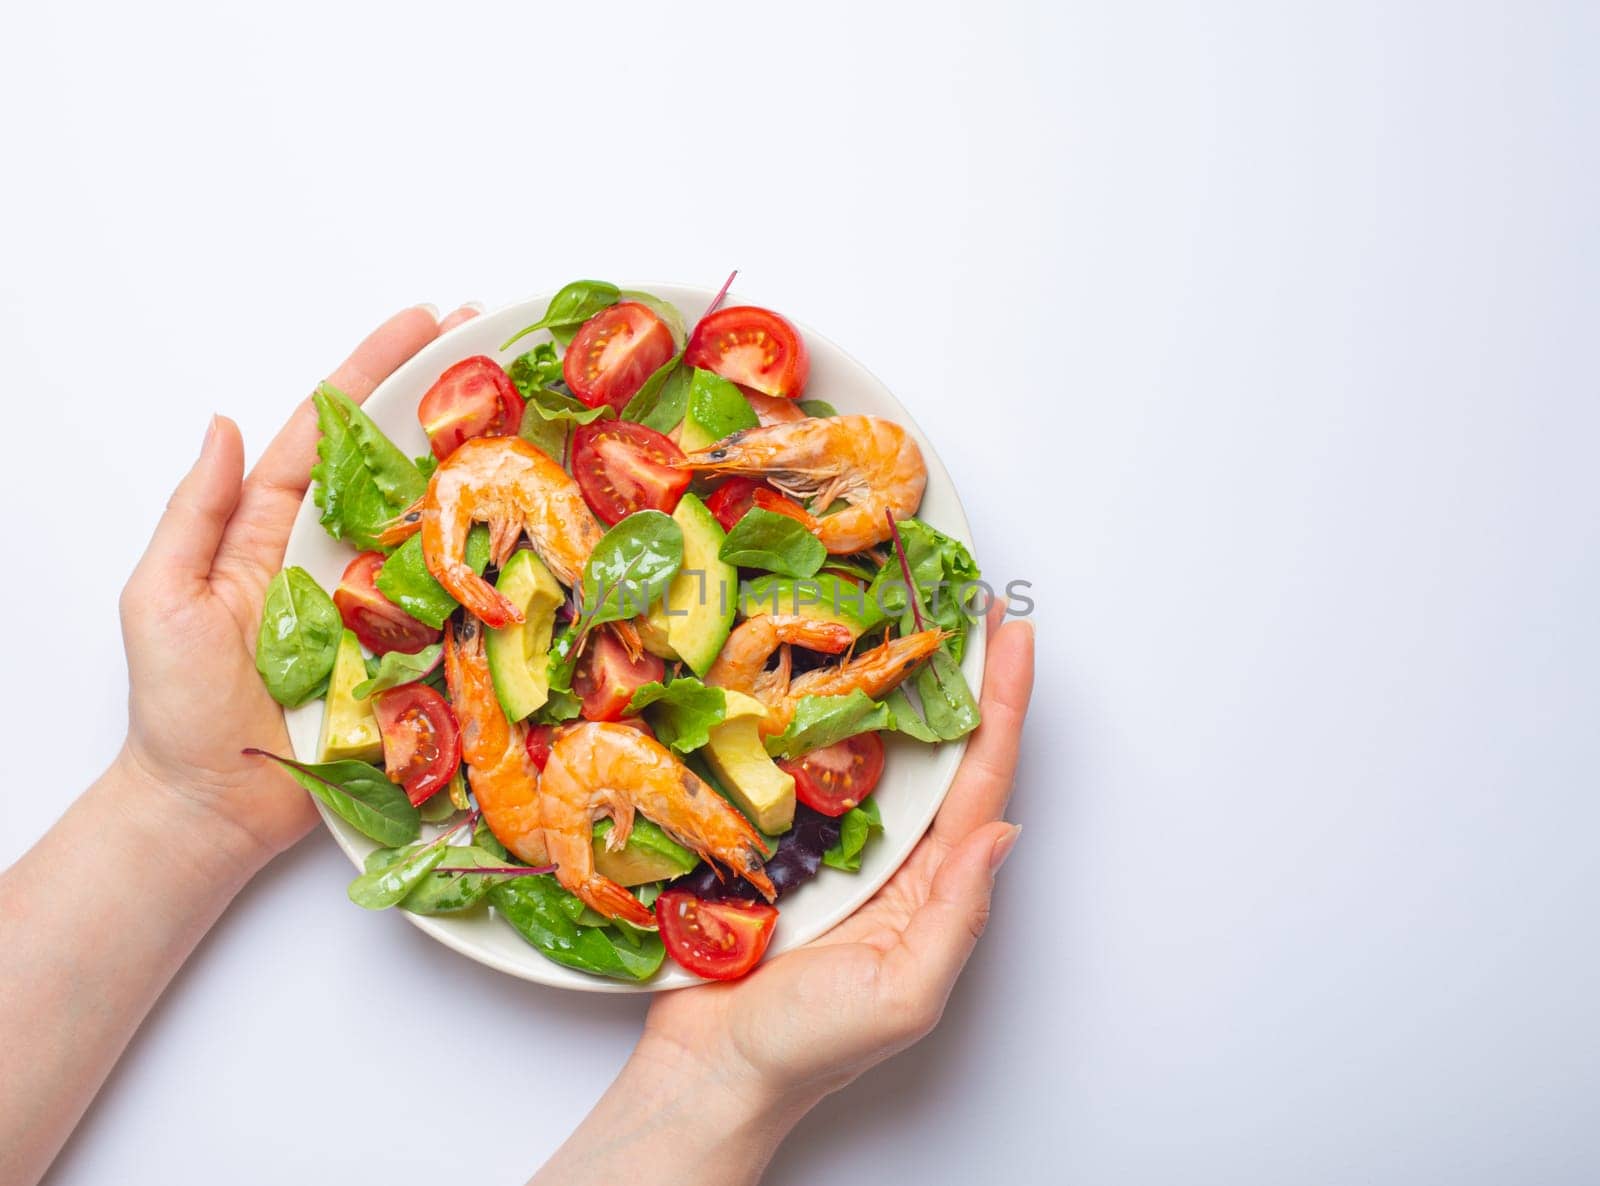 Female hands holding healthy salad with grilled shrimps, avocado, cherry tomatoes and green leaves on white plate isolated on white background top view. Clean eating, nutrition and dieting concept. by its_al_dente